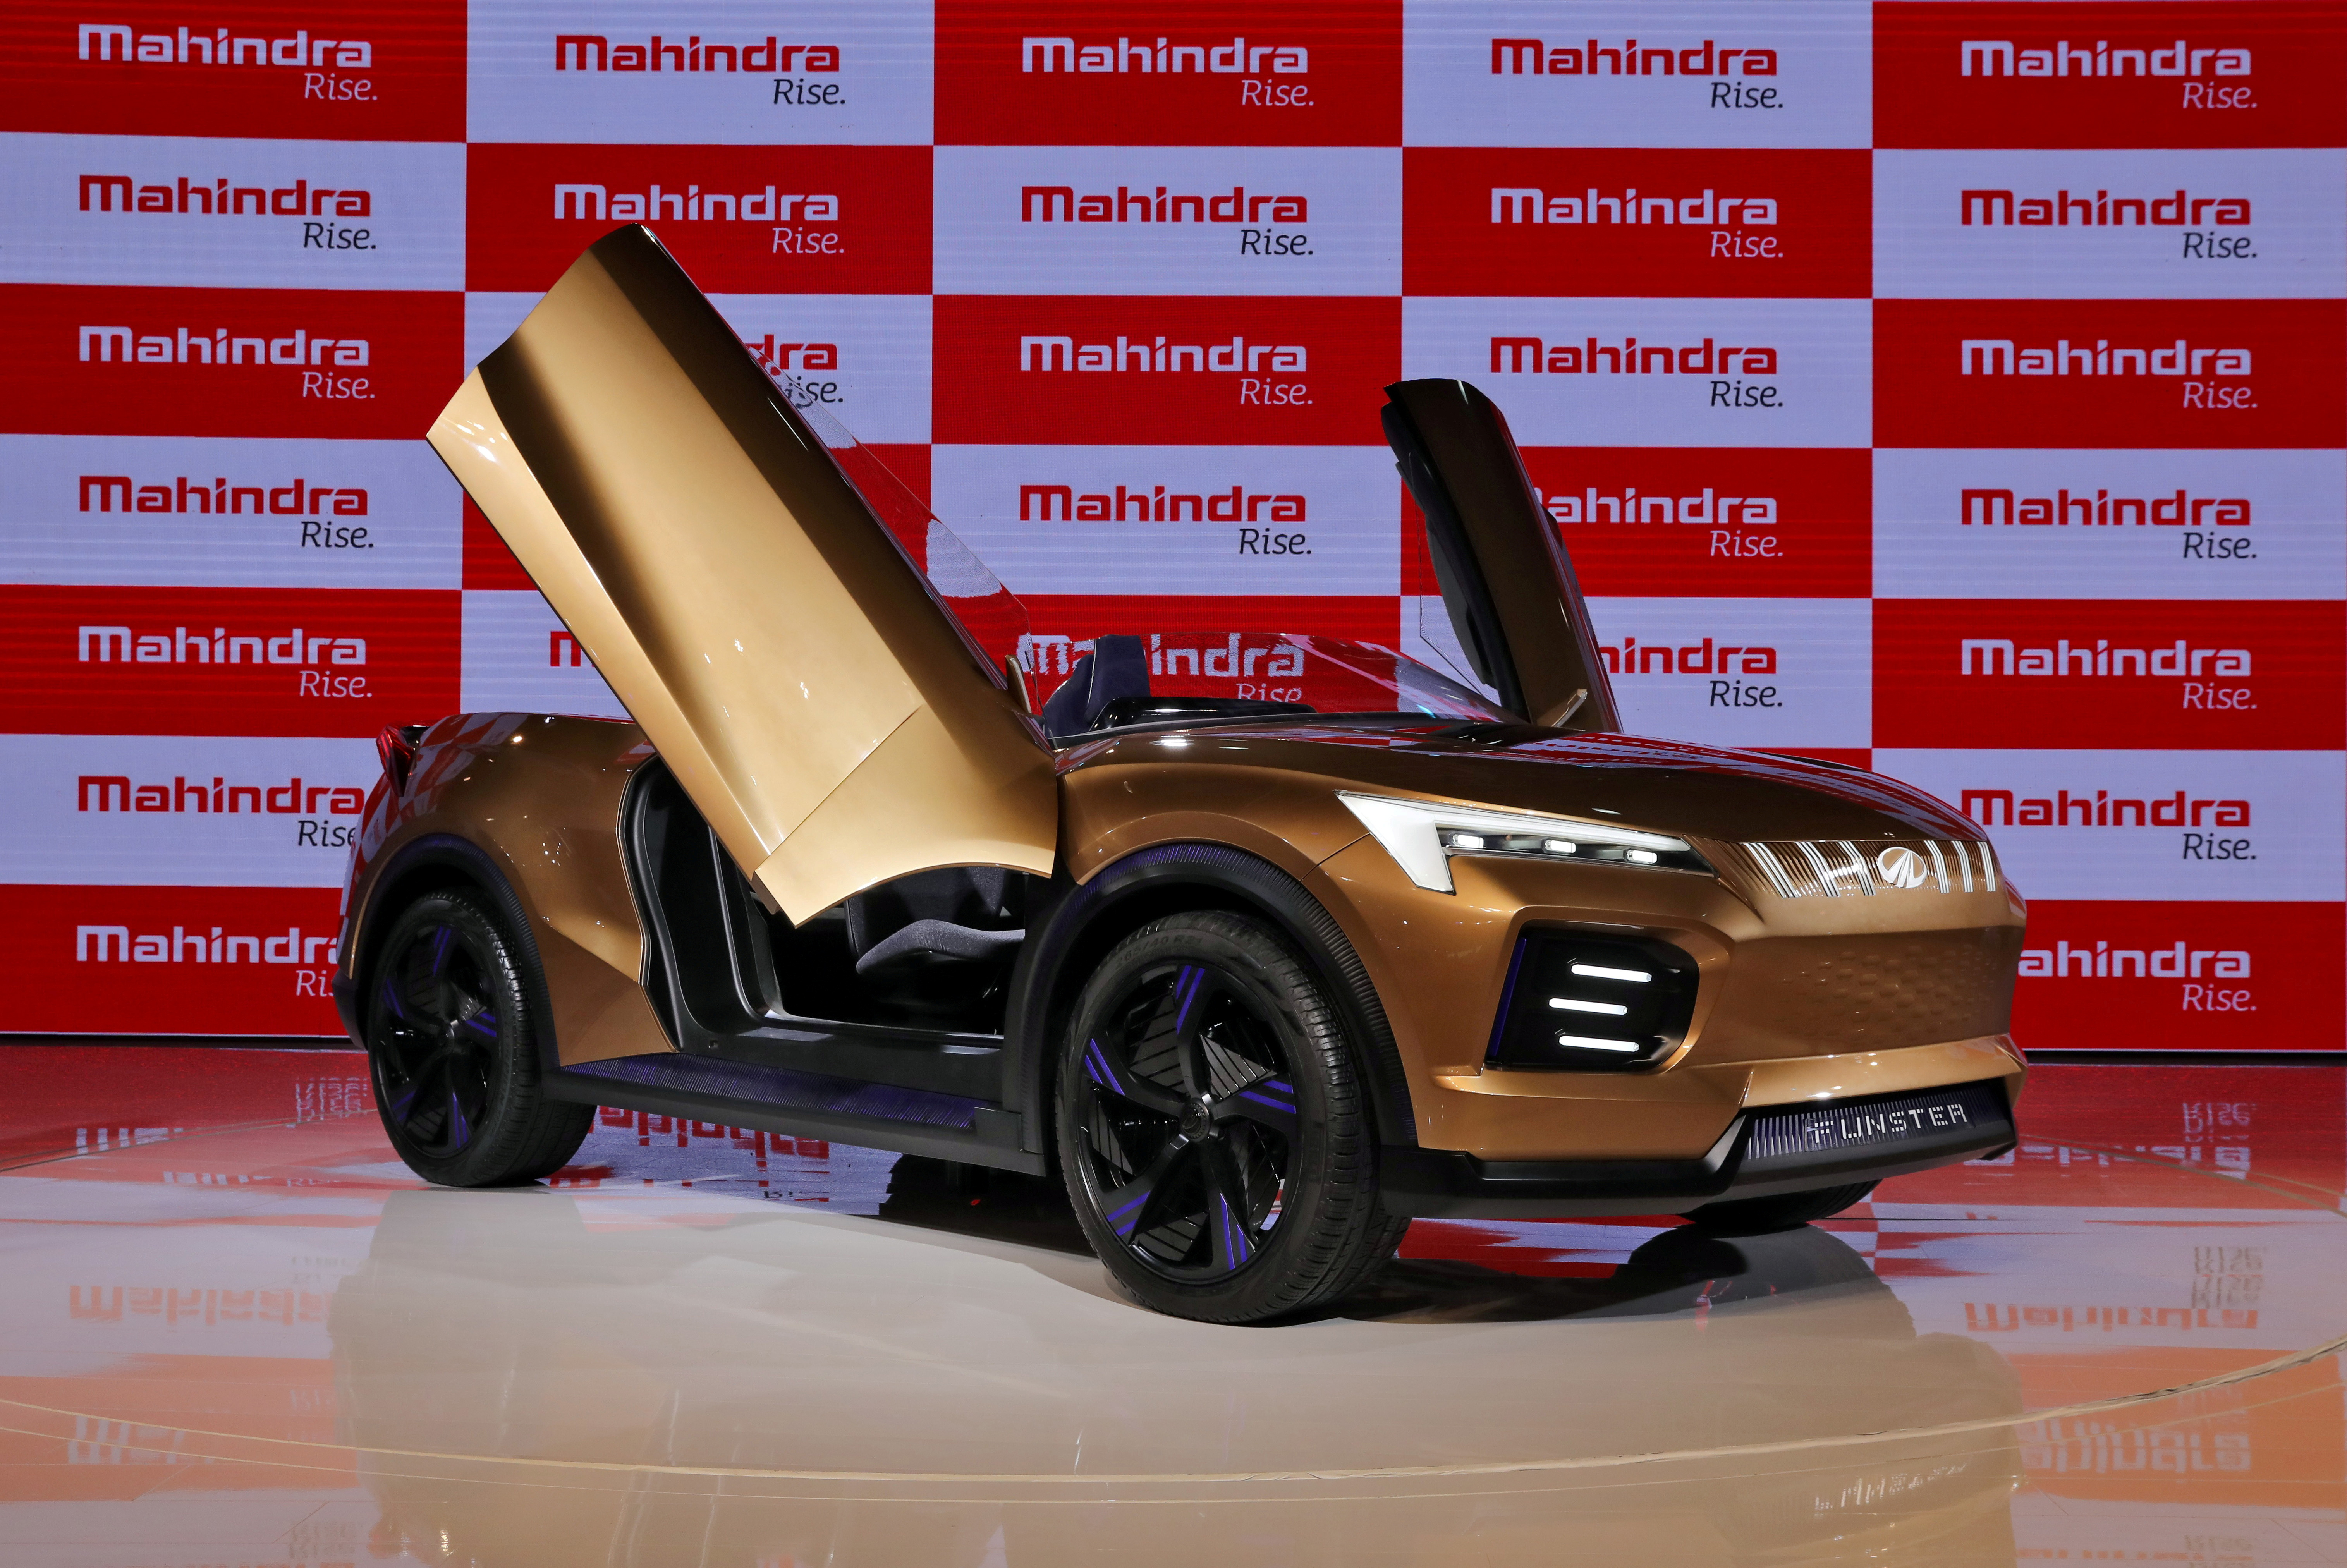 Mahindra Funster electric concept SUV is on display after it was unveiled at the India Auto Expo 2020 in Greater Noida